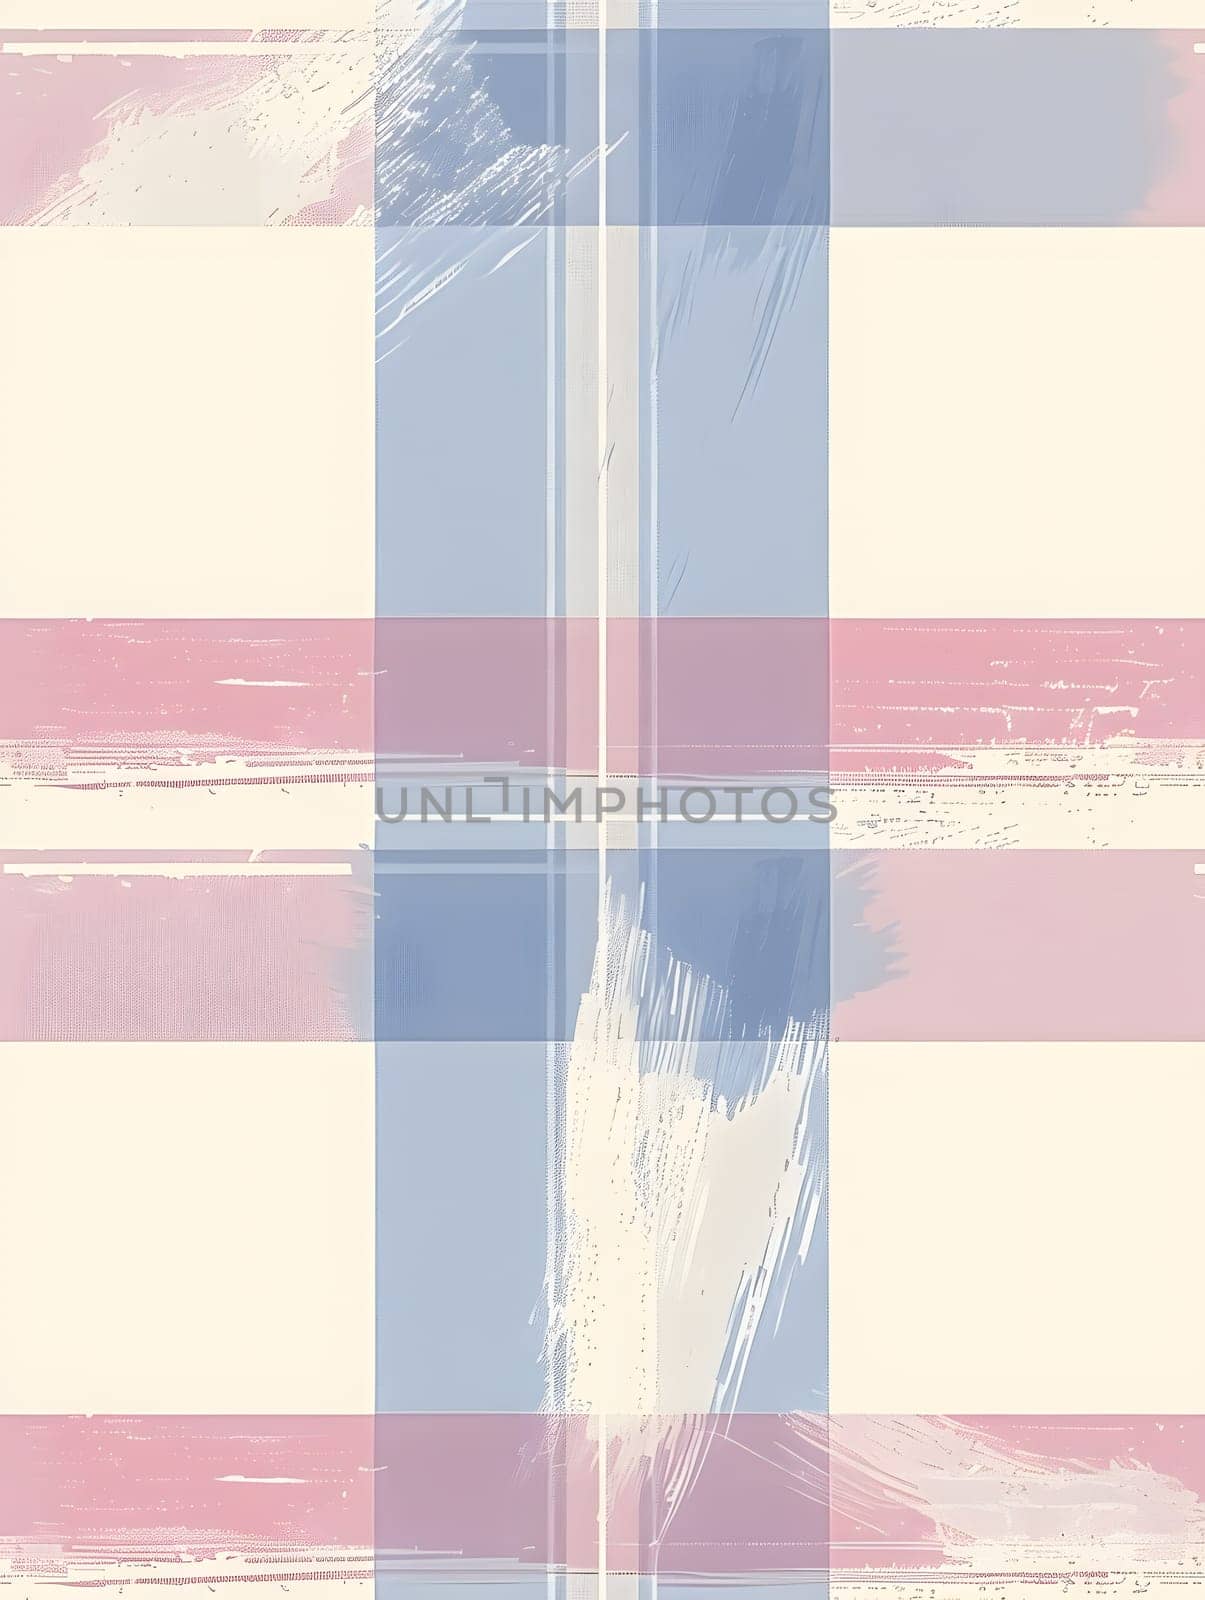 Rectangle pattern in red, white, and blue on white background by Nadtochiy